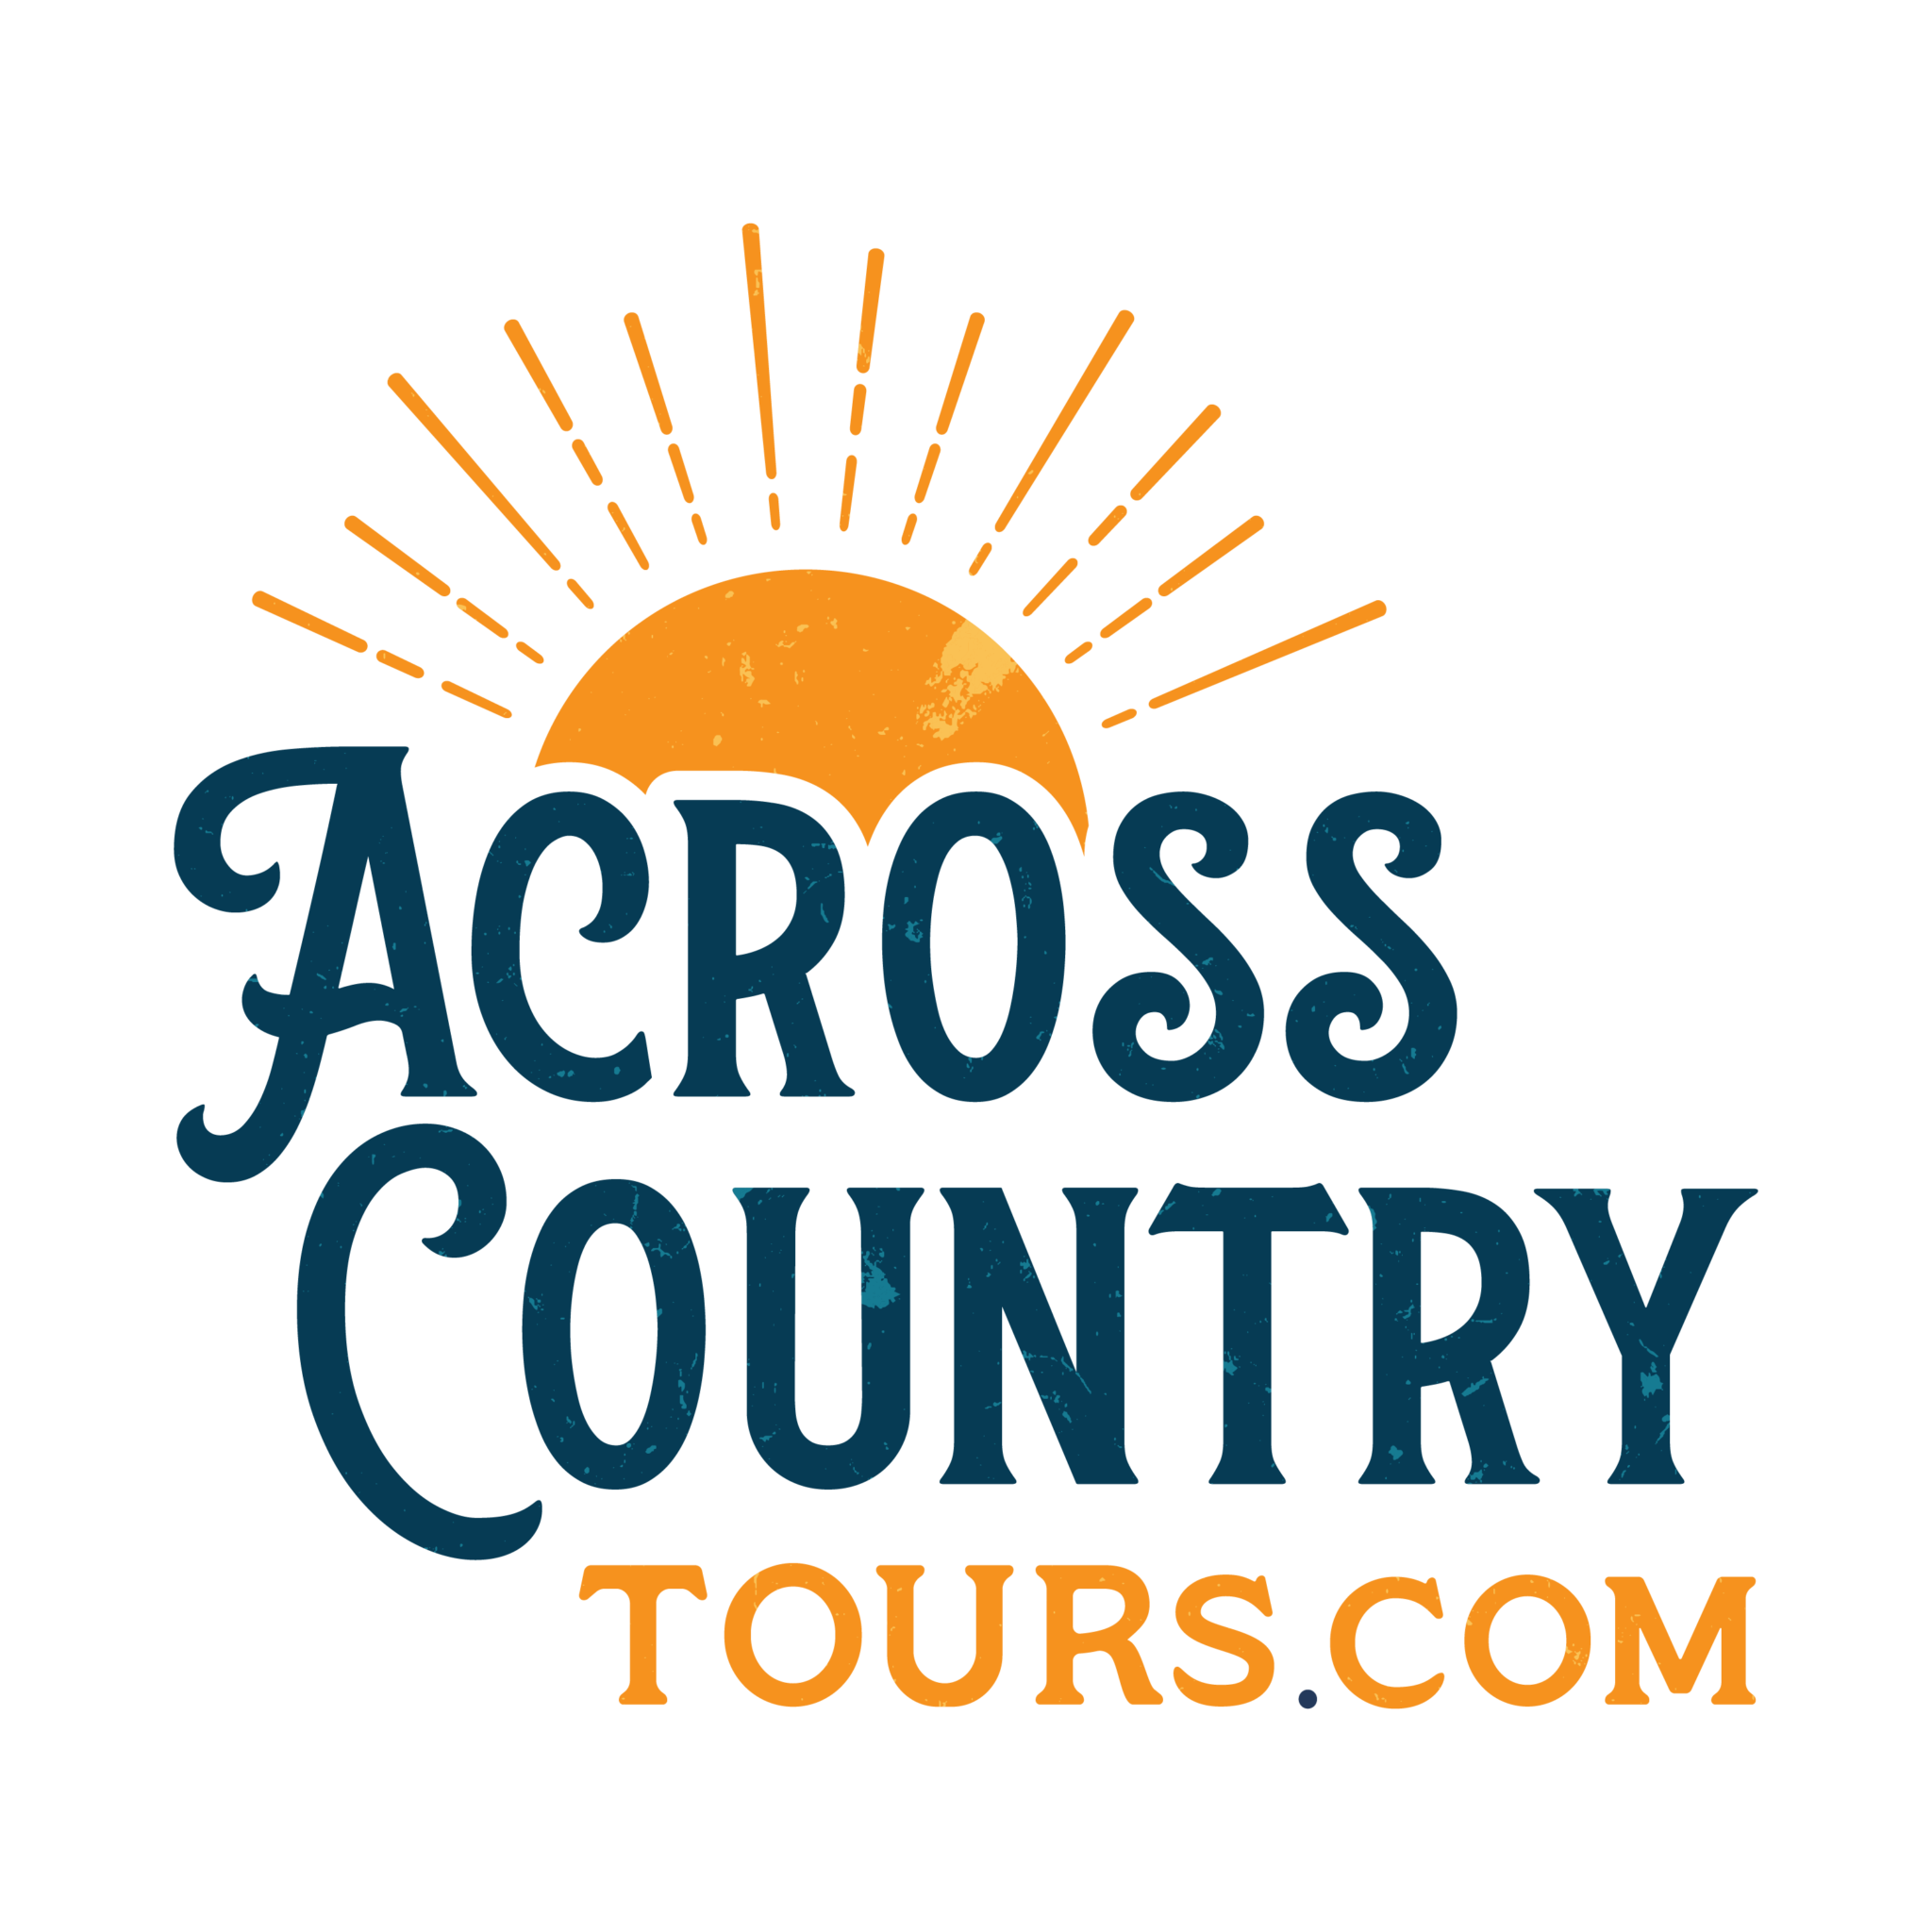 2022 and 2023 Extended Tours Across Country Tours